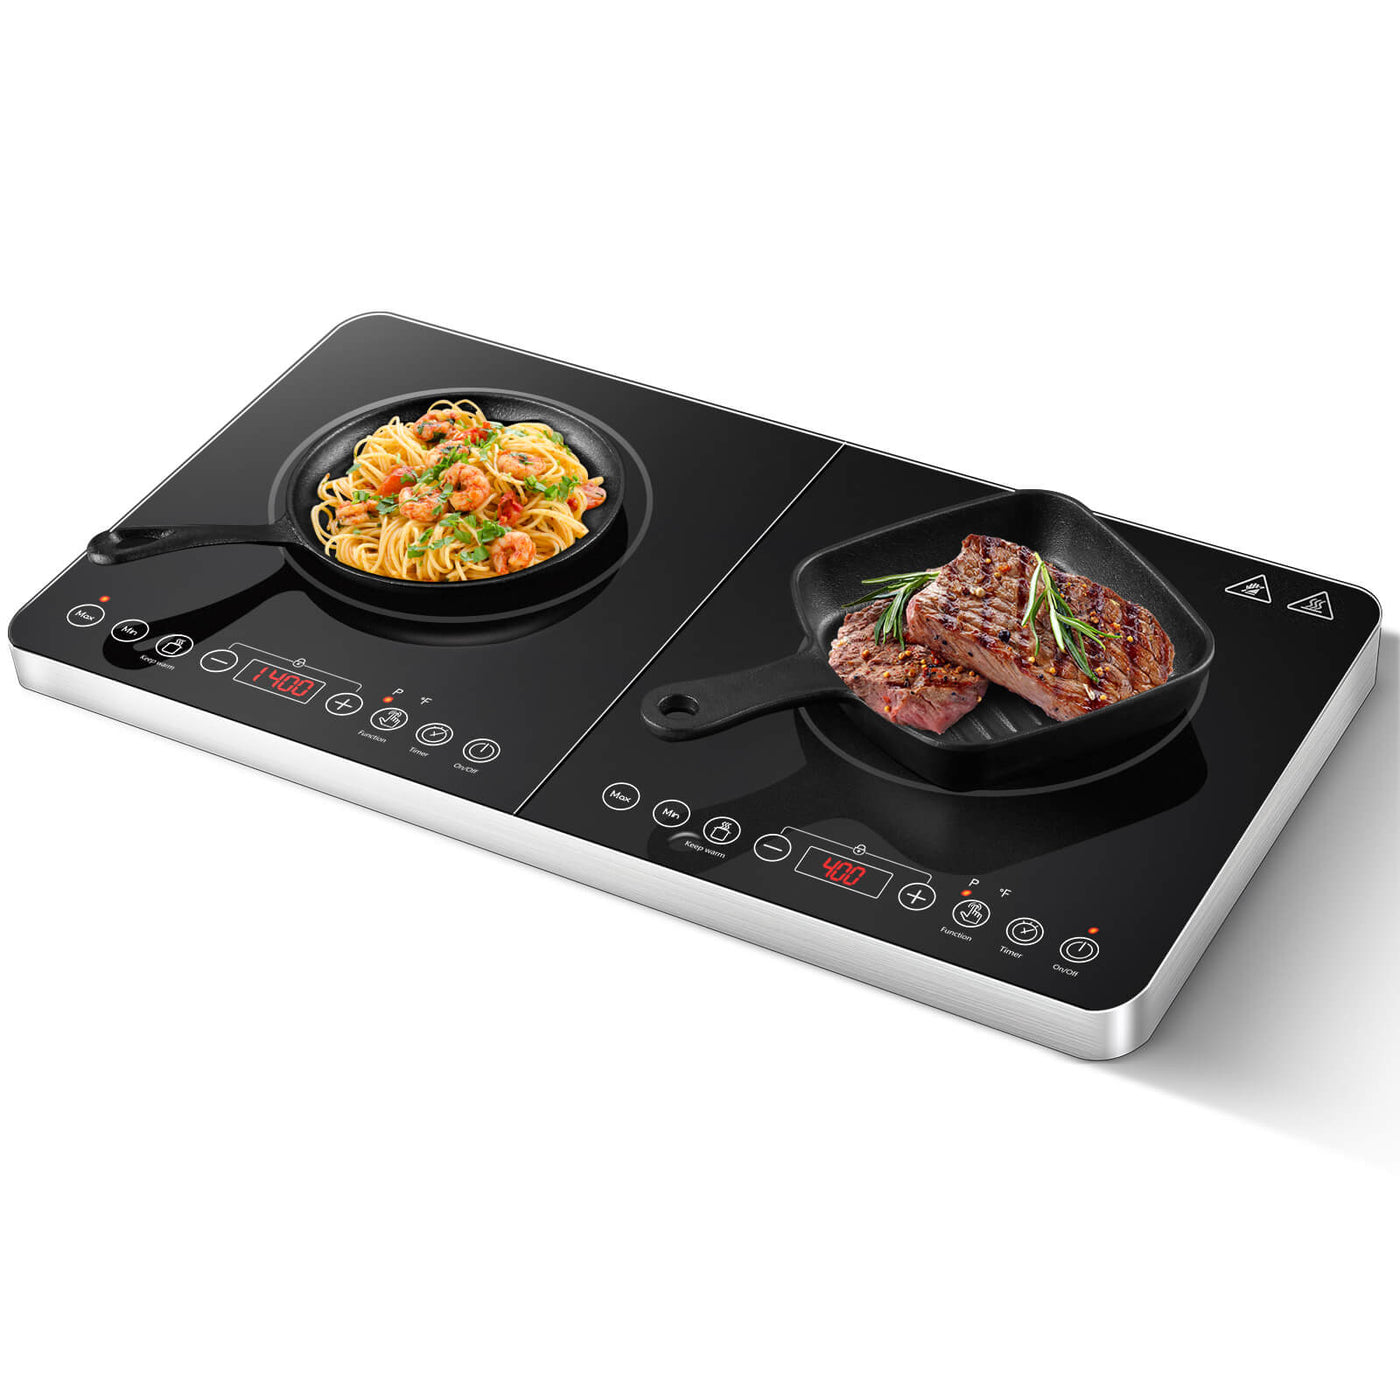 Aaobosi 1800W portable induction cooktop with two burners